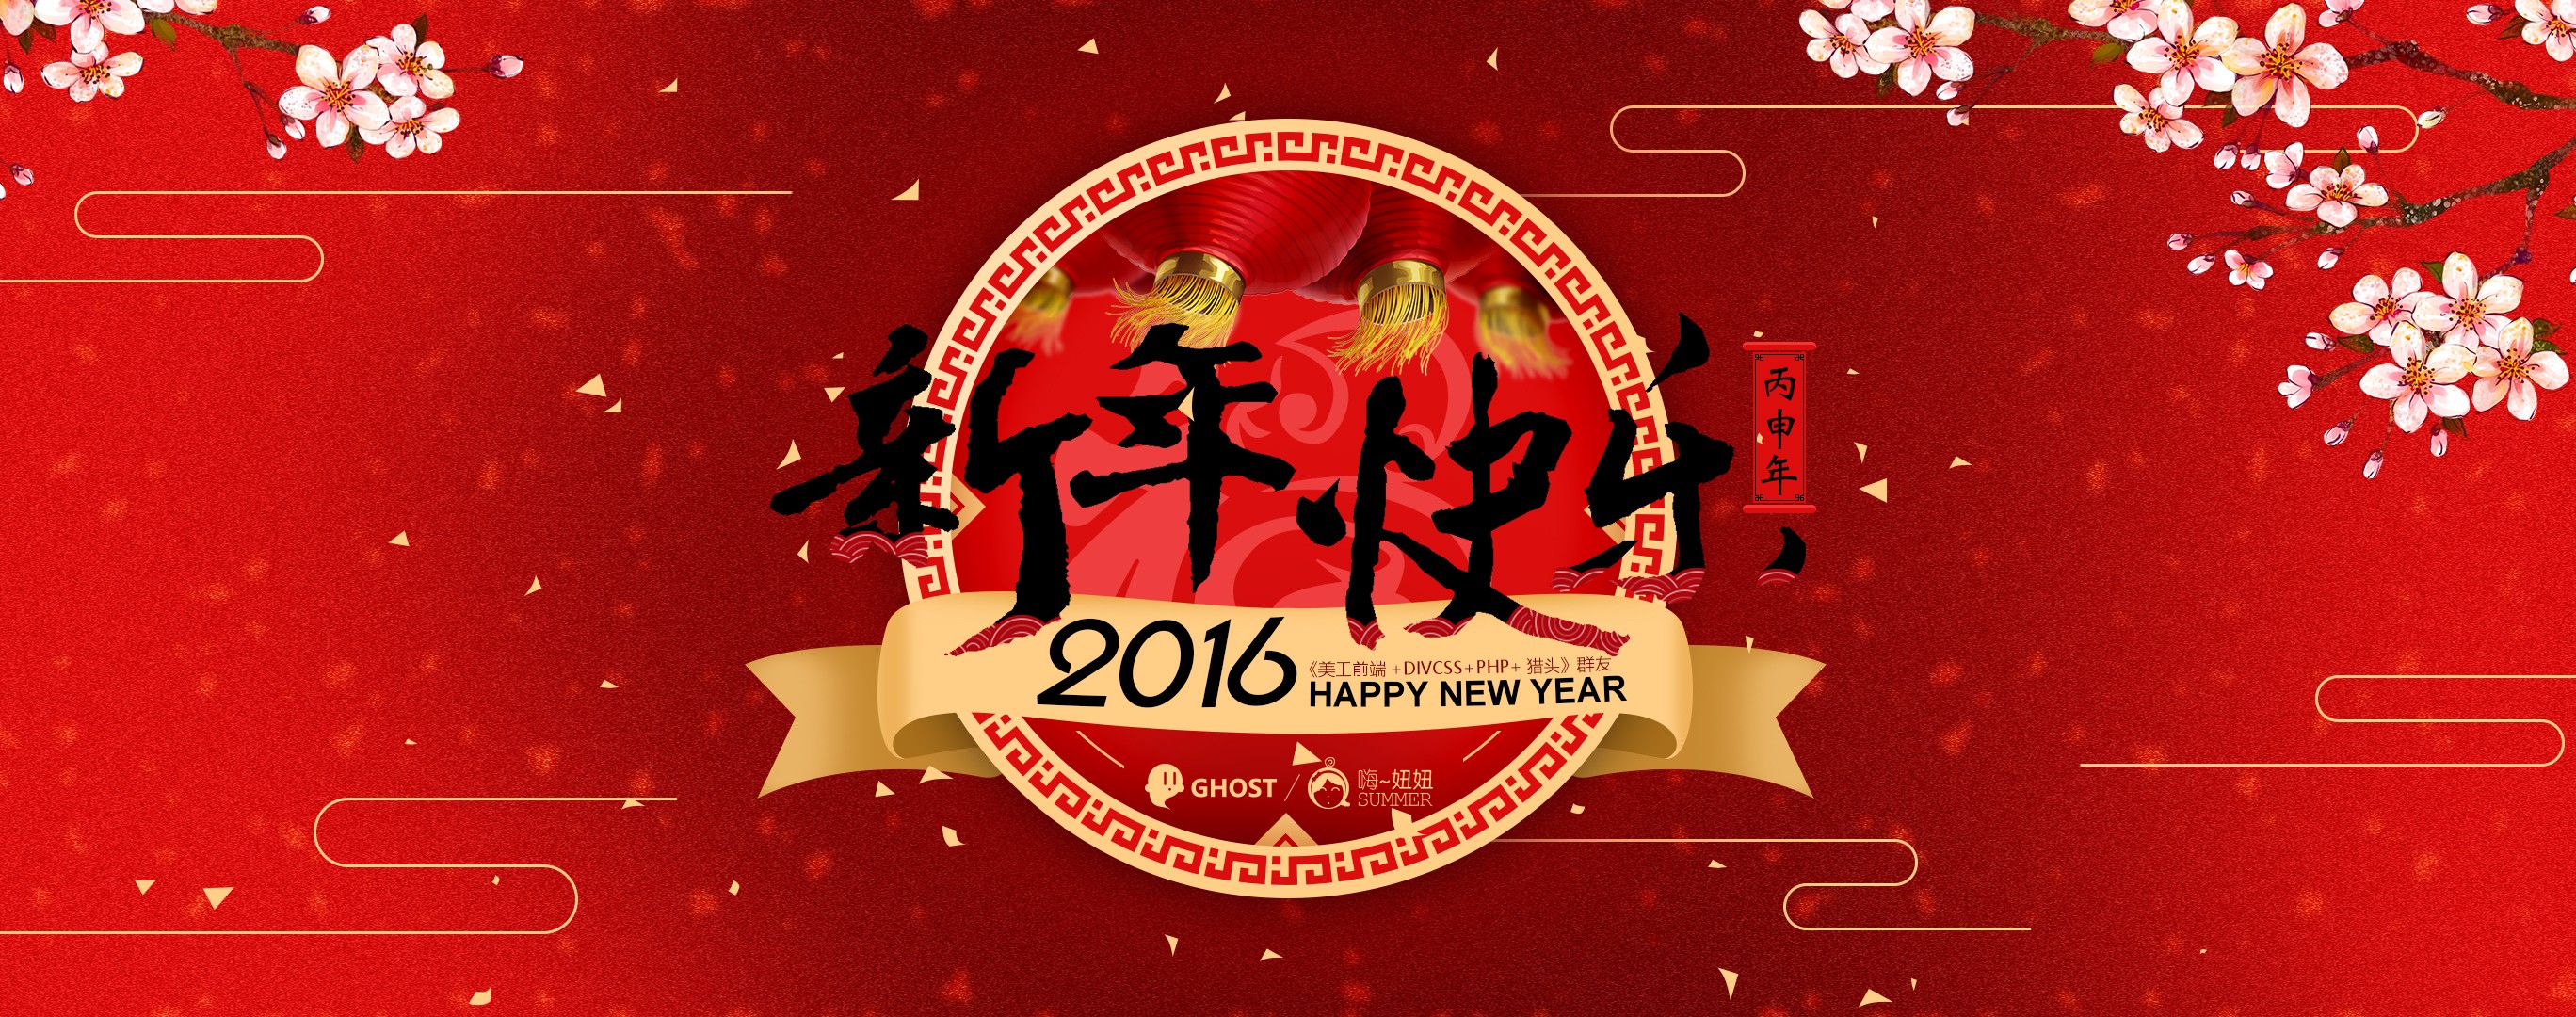 New Year 2016 Year Red Background 2736x1080